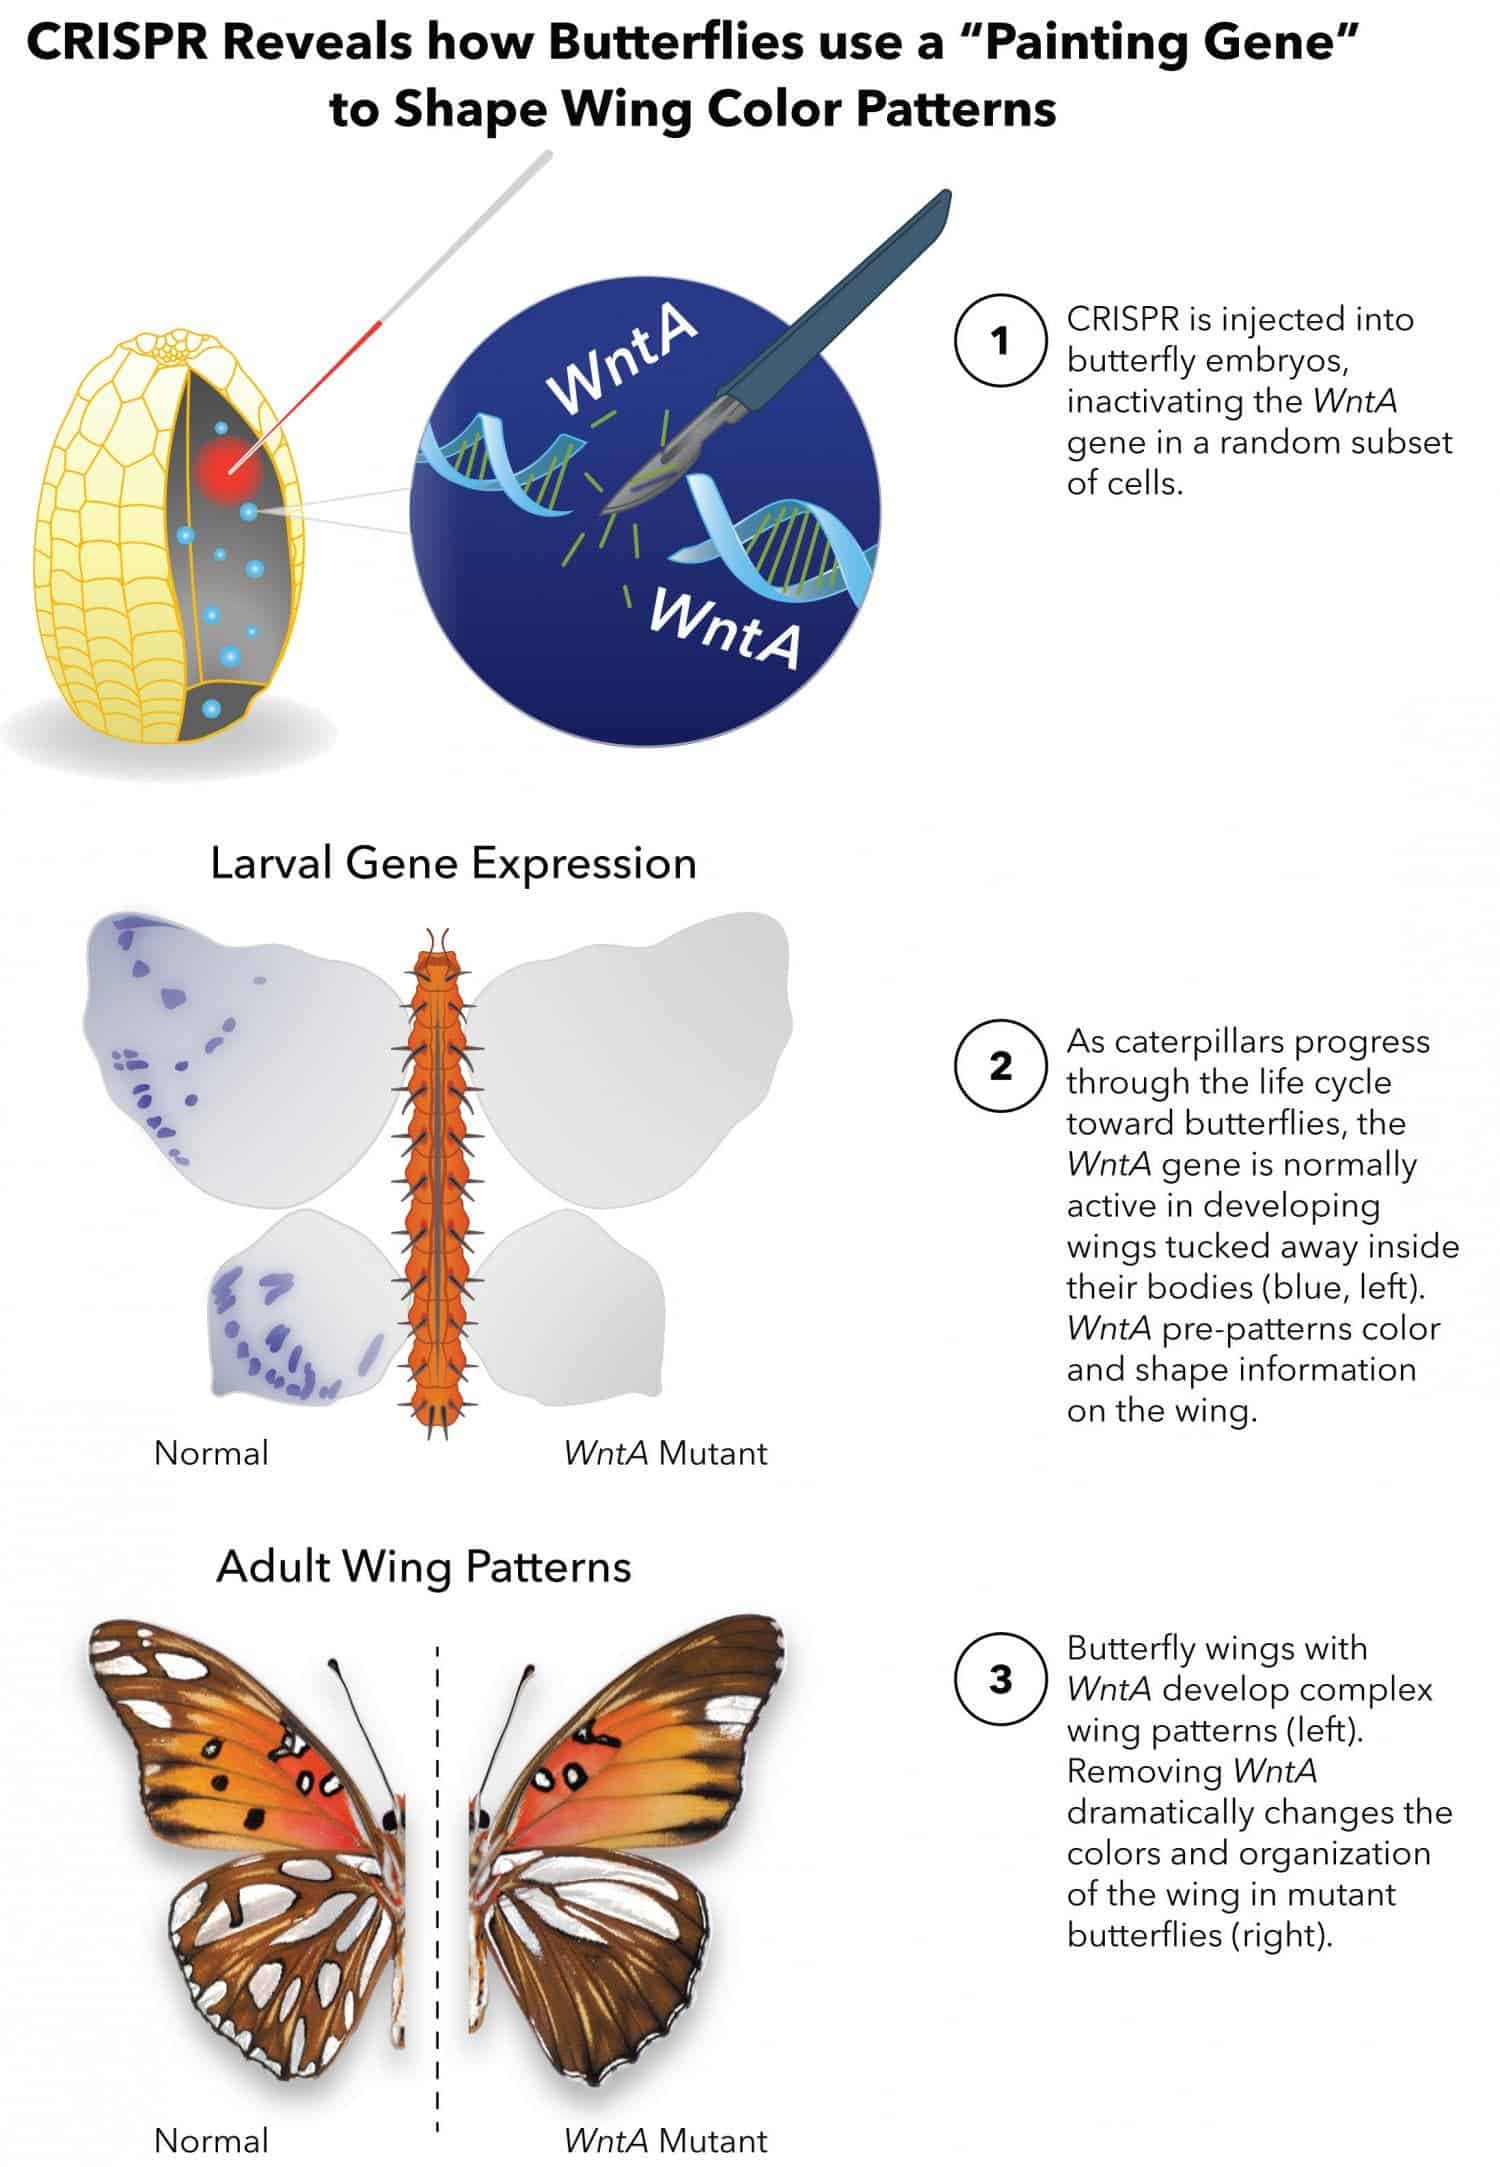 Schematic describing the CRISPR gene-editing technology used to investigate the key gene that determines butterfly wing patterns. Credit: The George Washington University